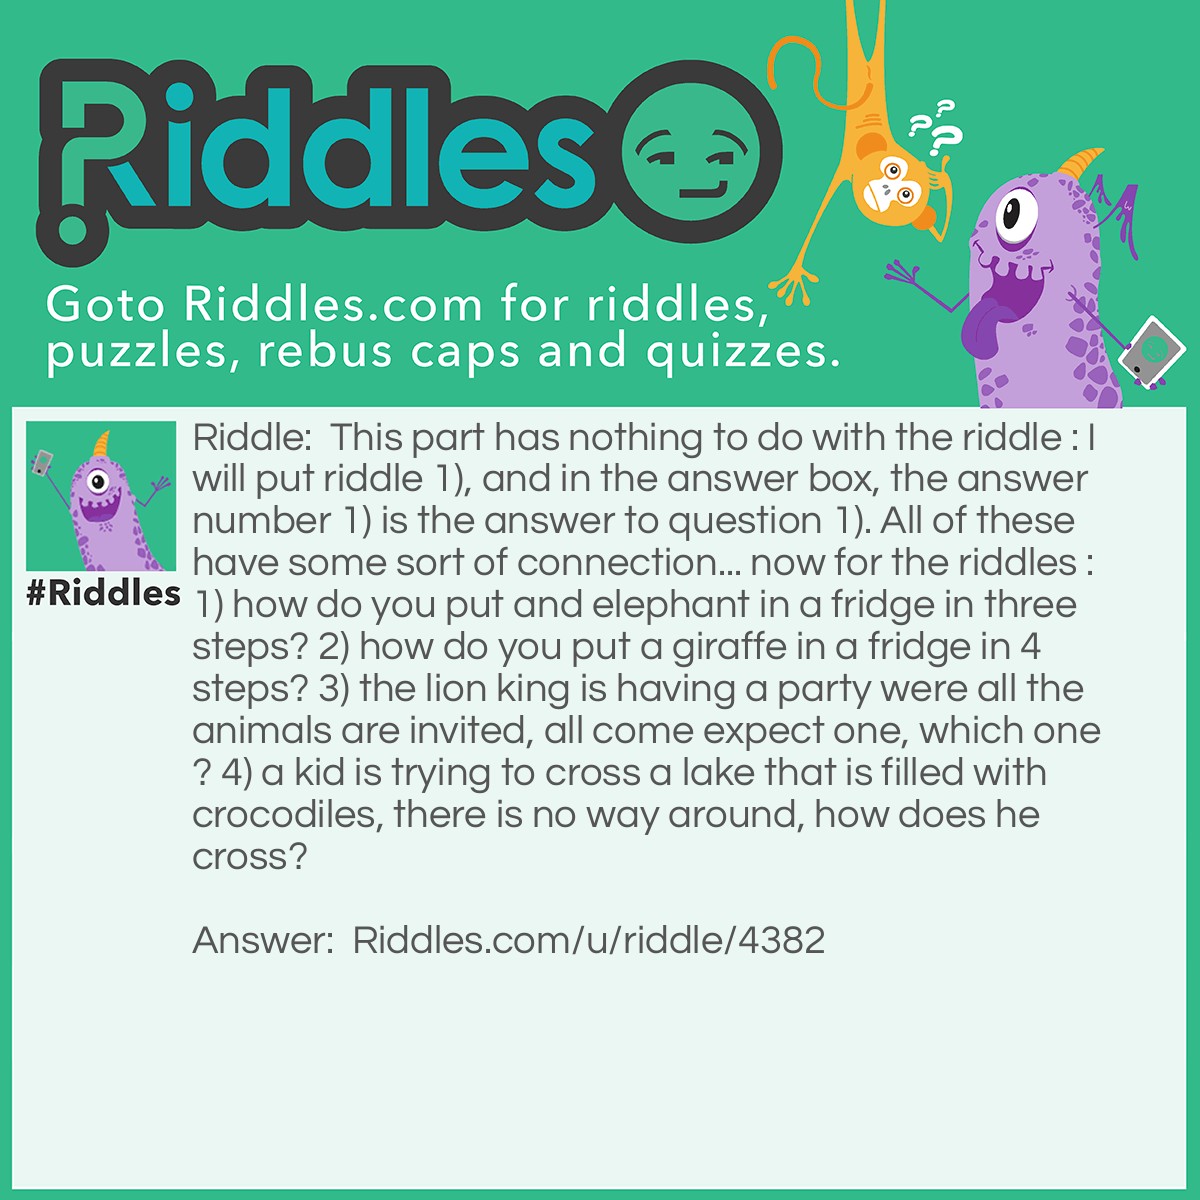 Riddle: This part has nothing to do with the riddle : I will put riddle 1), and in the answer box, the answer number 1) is the answer to question 1). All of these have some sort of connection... now for the riddles : 1) how do you put and elephant in a fridge in three steps? 2) how do you put a giraffe in a fridge in 4 steps? 3) the lion king is having a party were all the animals are invited, all come expect one, which one? 4) a kid is trying to cross a lake that is filled with crocodiles, there is no way around, how does he cross? Answer: 1) you open the fridge, you put the elephant in it, you close the fridge. 2) you open the fridge, take out the elephant, put in the giraffe, close the fridge. 3) the giraffe, it's in the fridge. 4) by swimming, the crocodiles are all at the kings party.